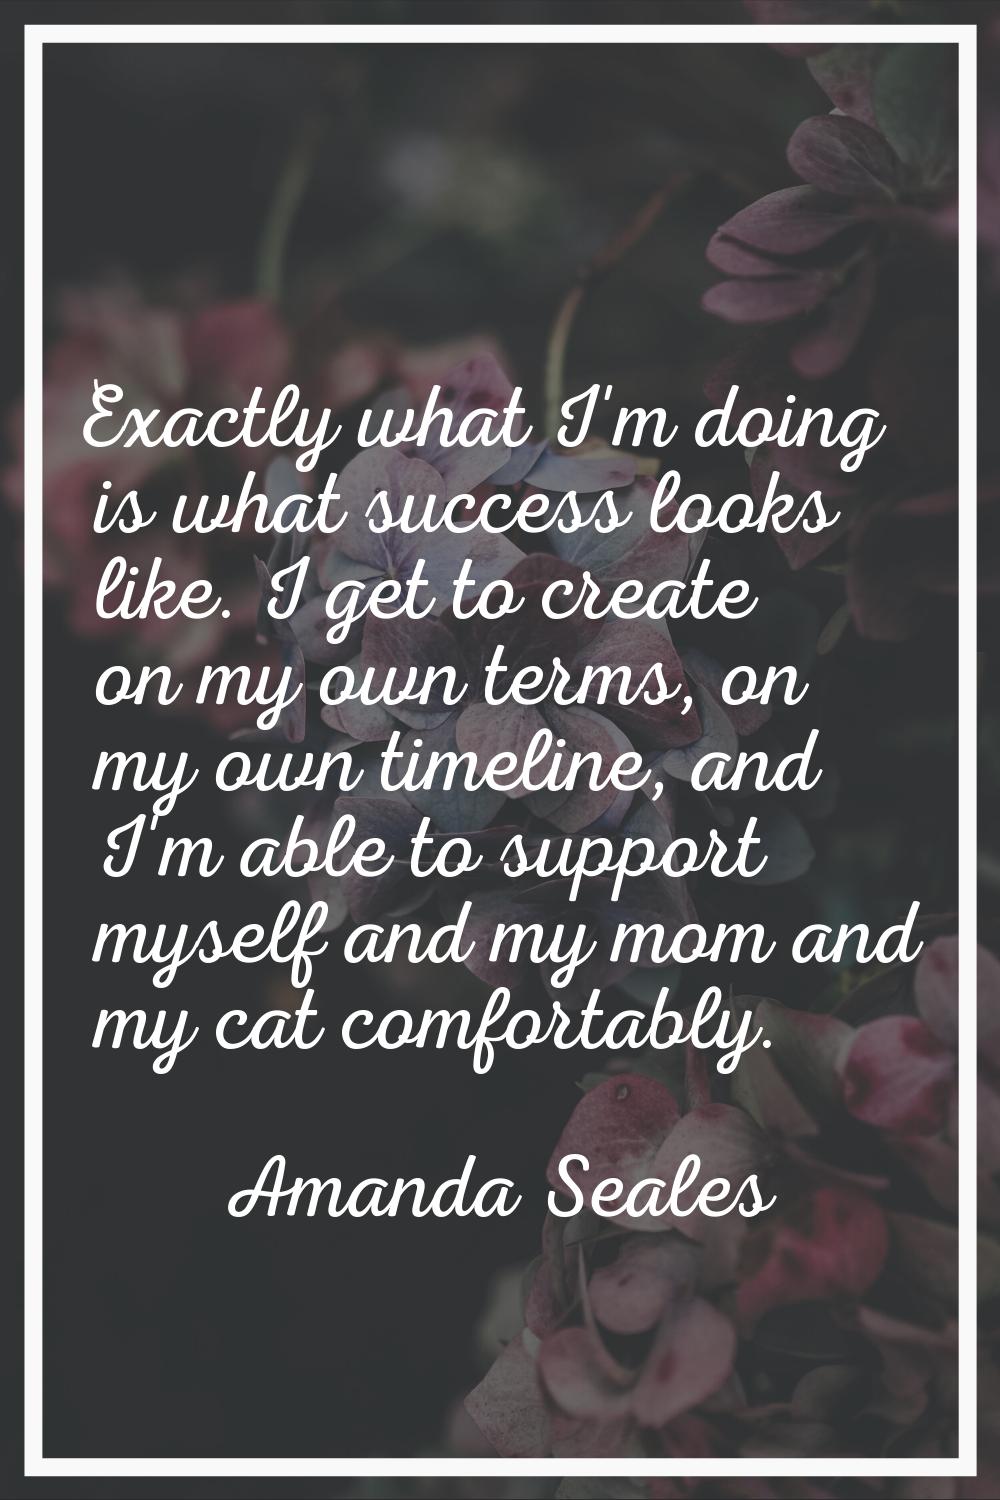 Exactly what I'm doing is what success looks like. I get to create on my own terms, on my own timel